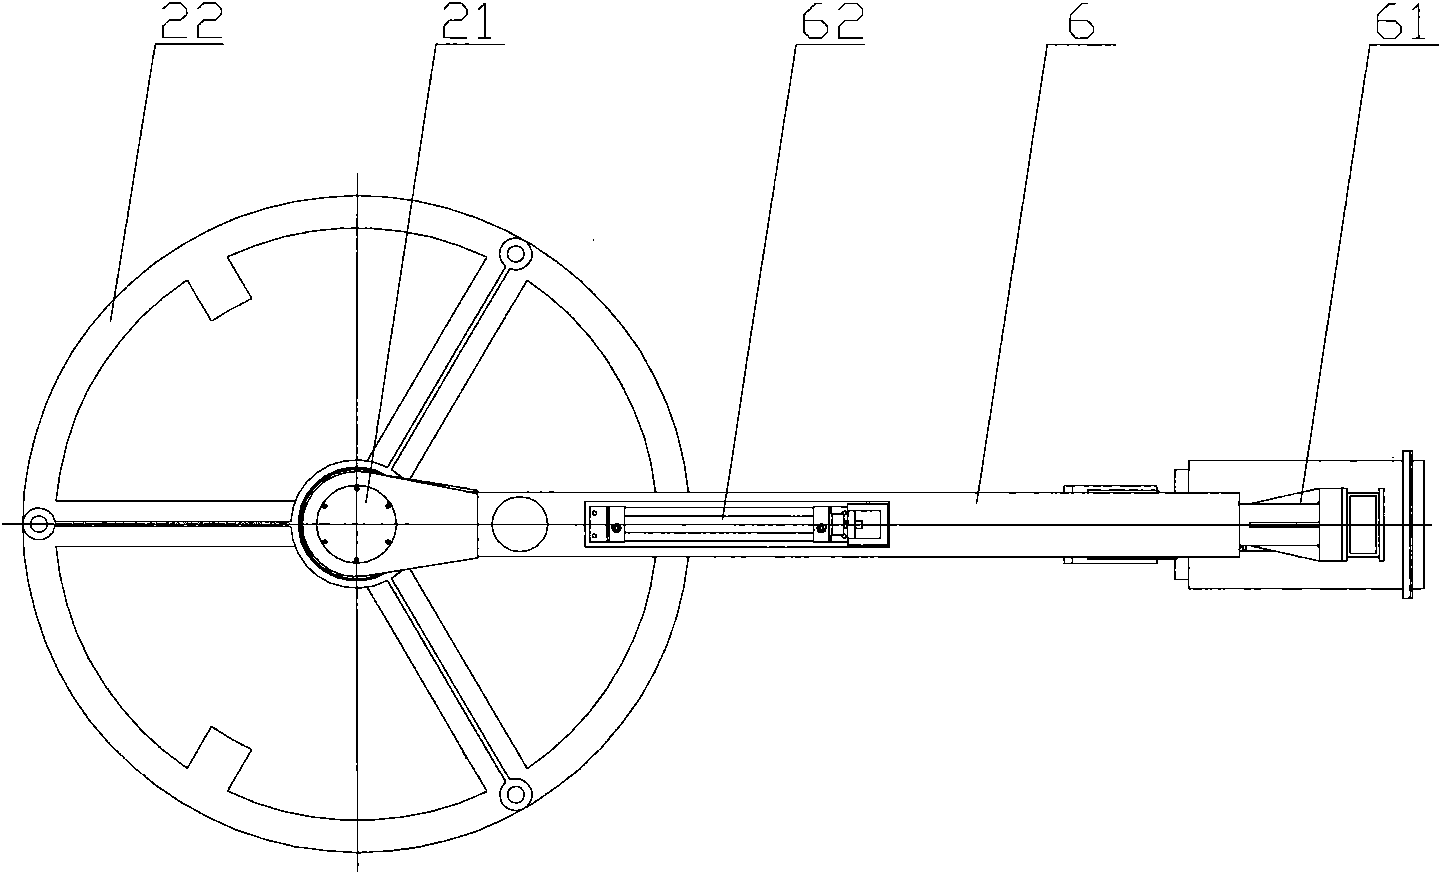 Bolt tightening machine for connecting slewing bearing and hub